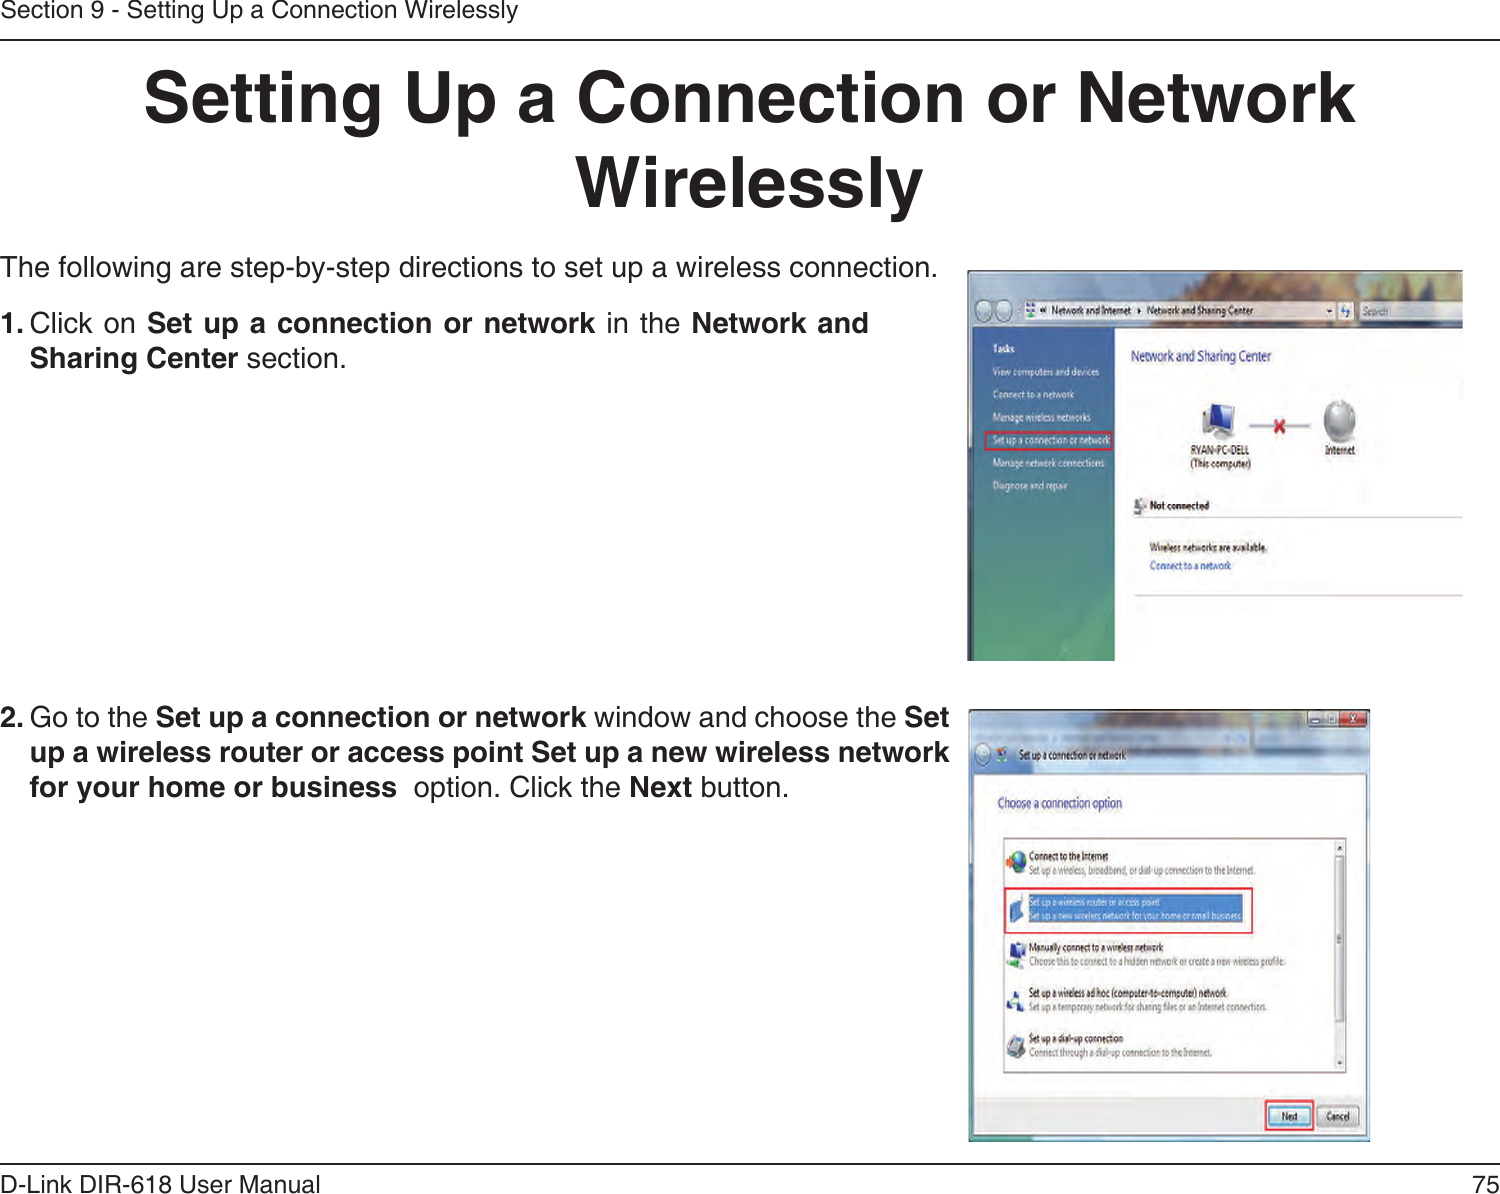 75D-Link DIR-618 User ManualSection 9 - Setting Up a Connection WirelesslySetting Up a Connection or Network WirelesslyThe following are step-by-step directions to set up a wireless connection.2. Go to the Set up a connection or network window and choose the Set up a wireless router or access point Set up a new wireless network for your home or business  option. Click the Next button. 1. Click on Set up a connection or network in the Network and Sharing Center section. 